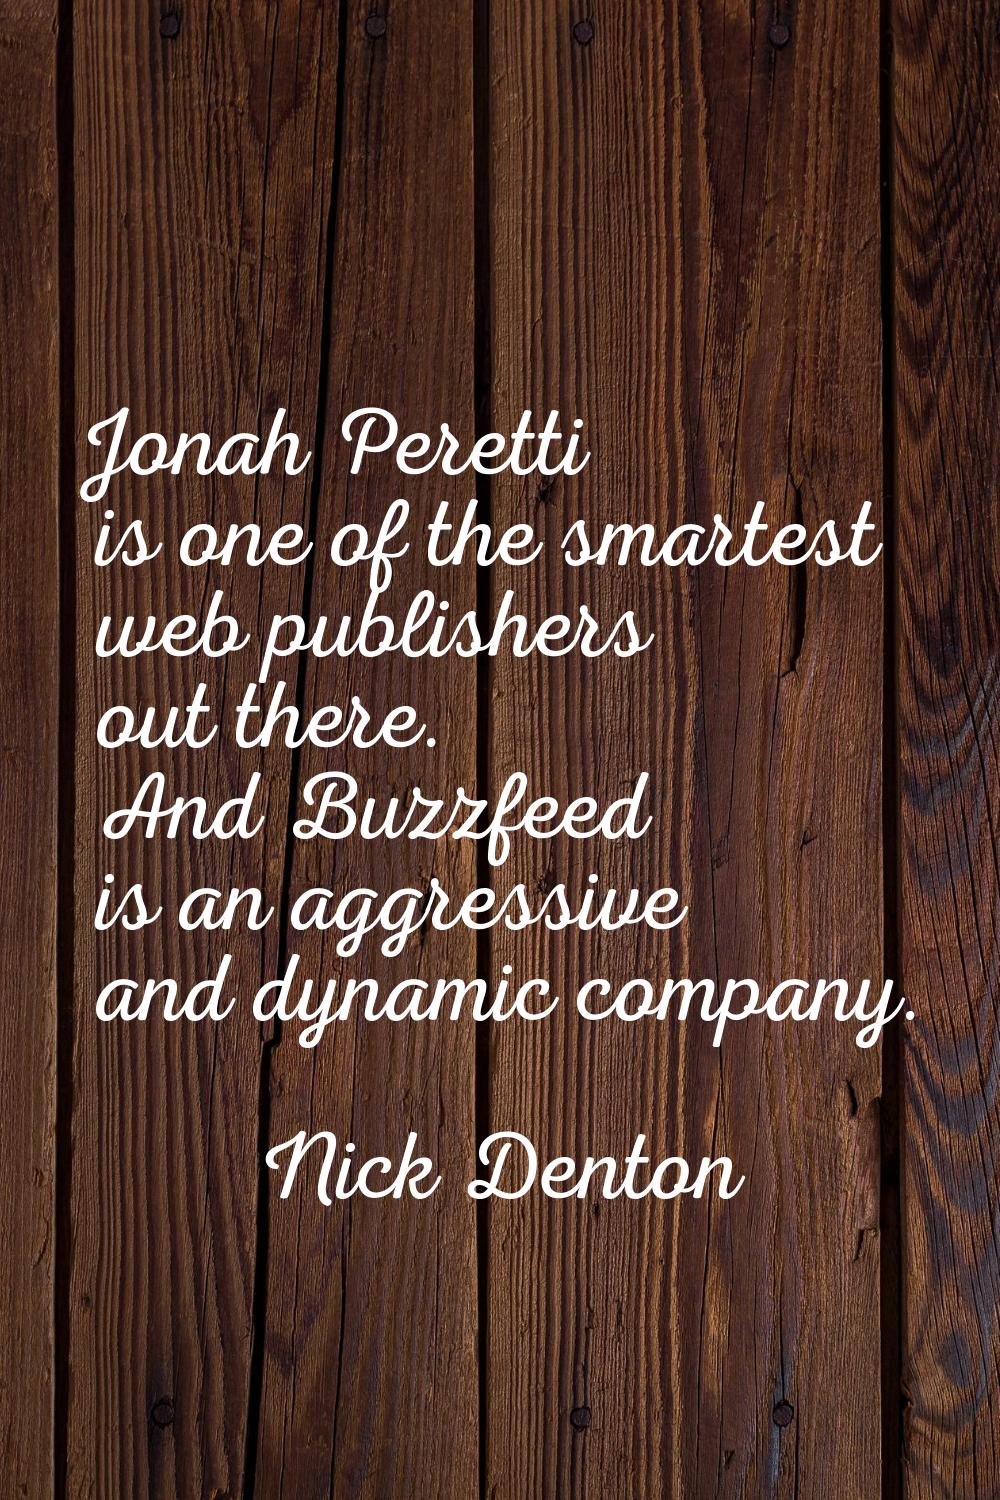 Jonah Peretti is one of the smartest web publishers out there. And Buzzfeed is an aggressive and dy